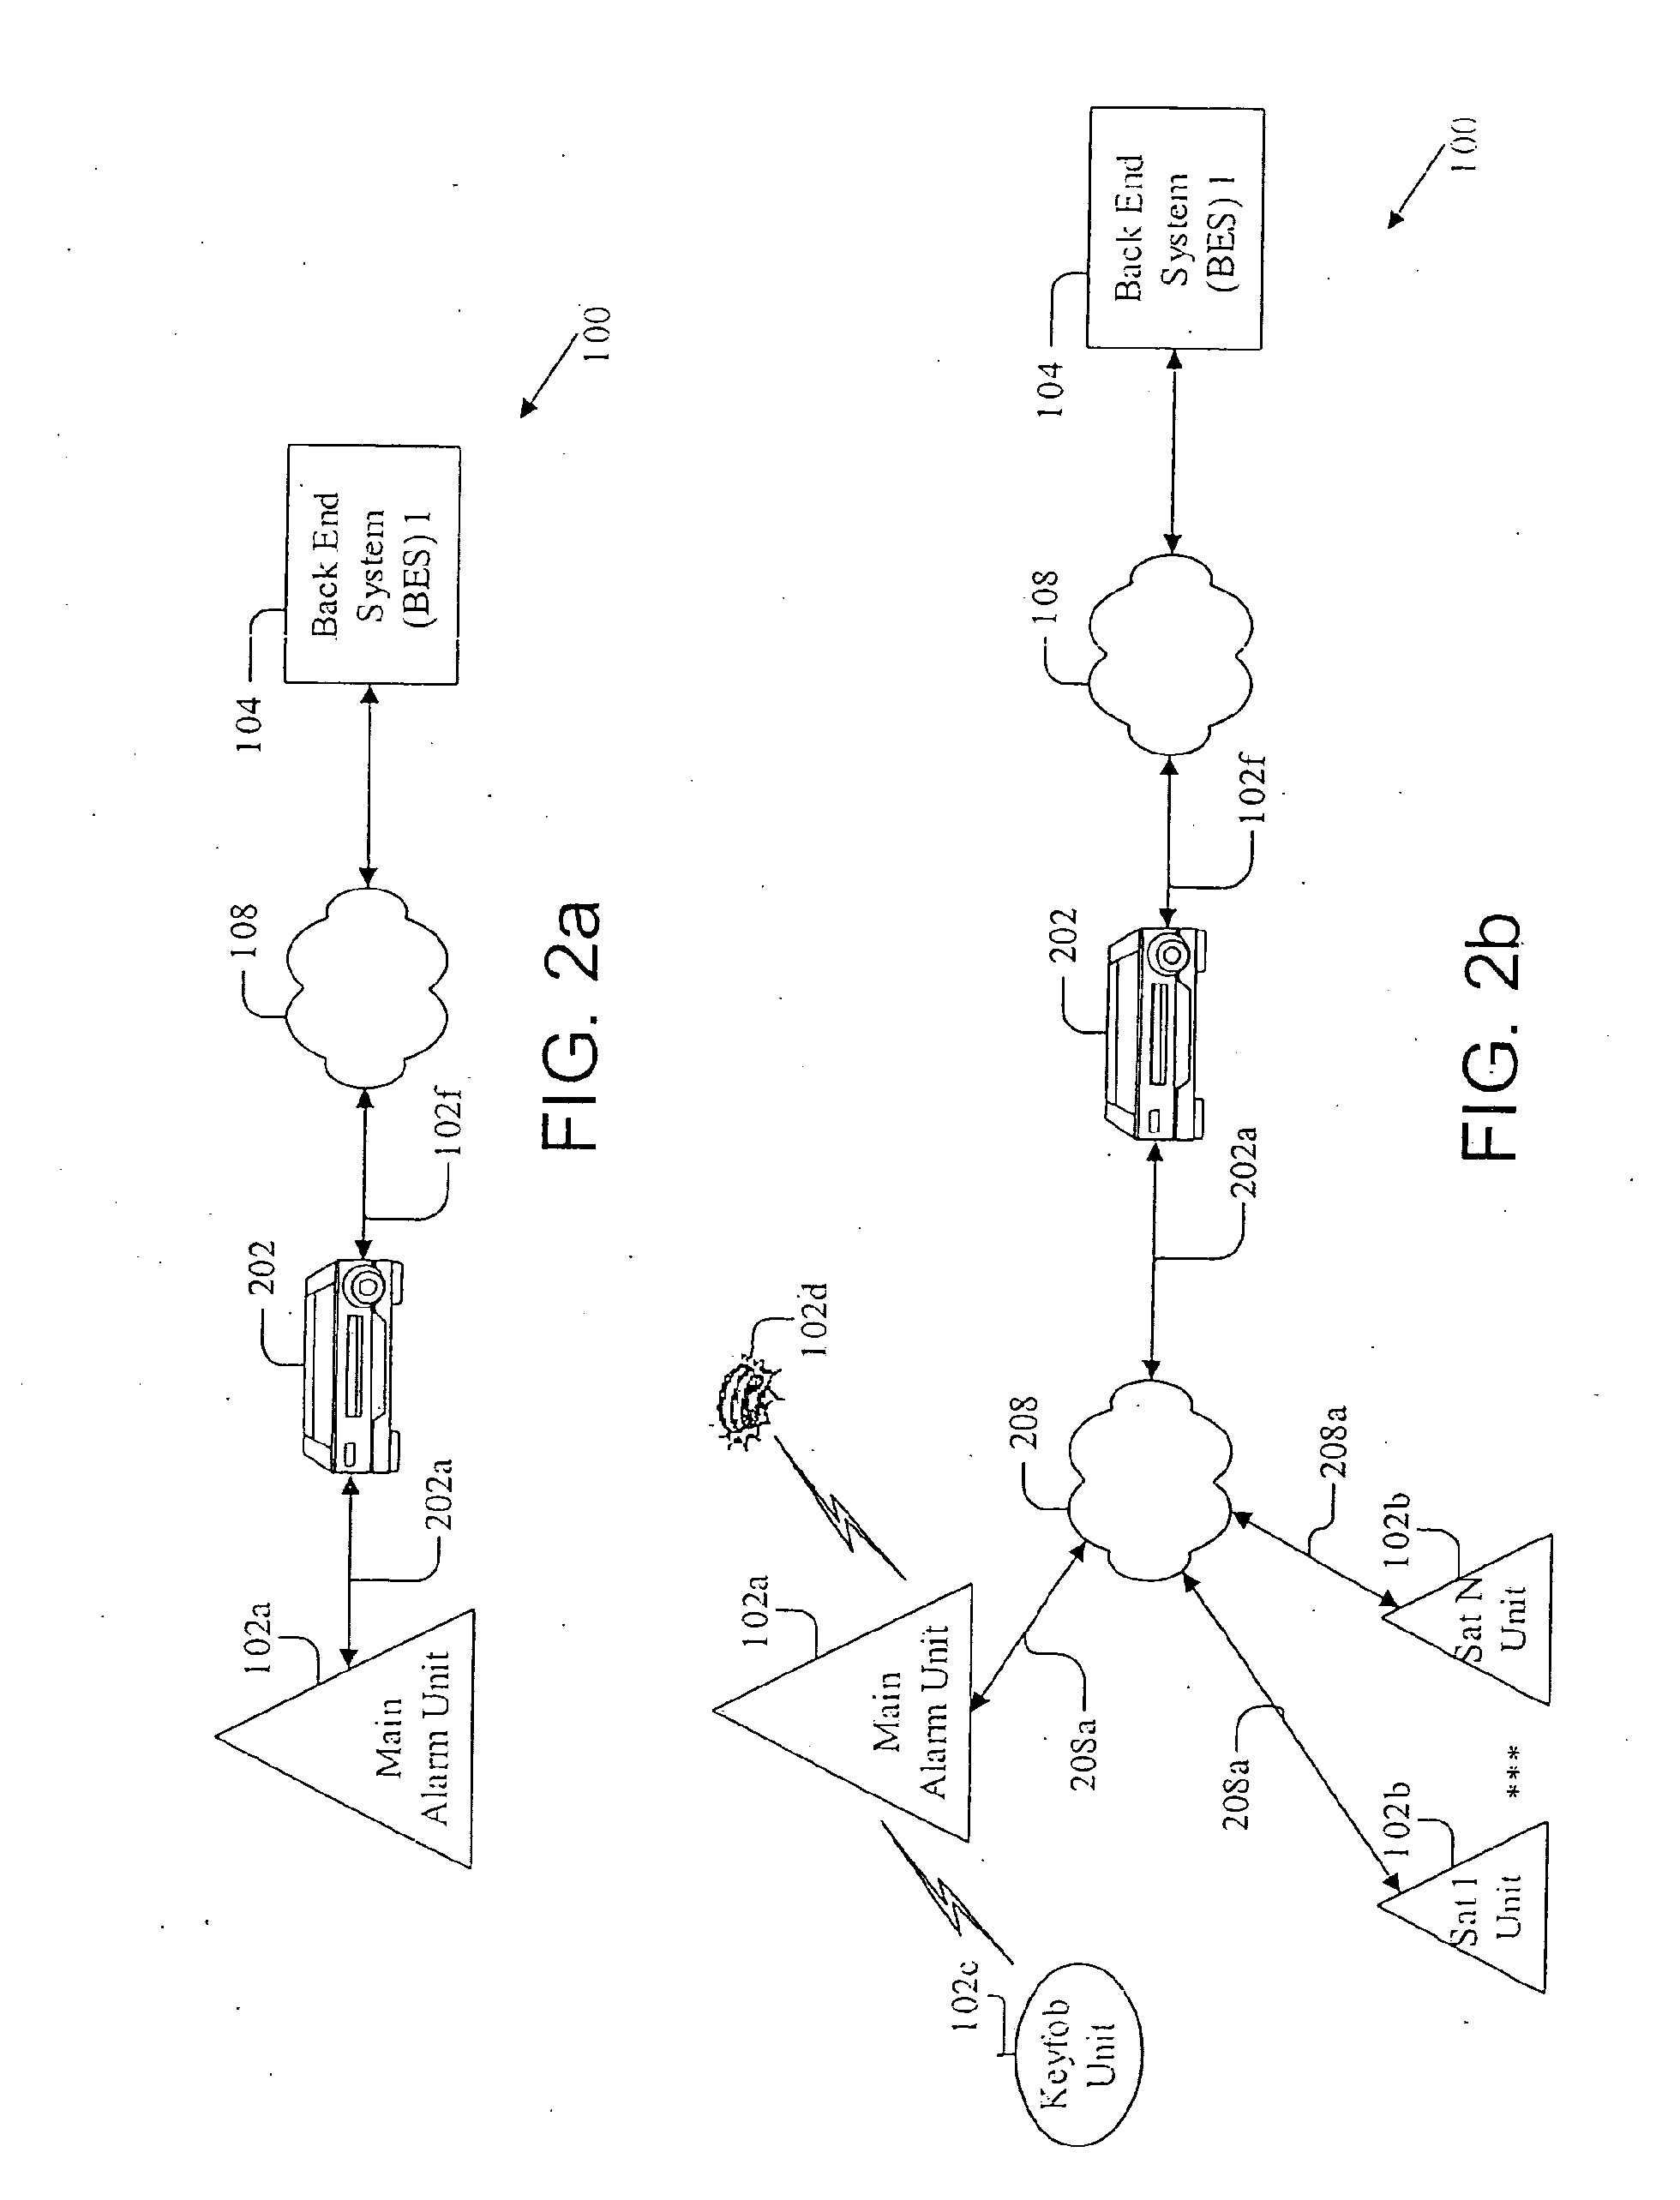 System and method for reliable communications in a one-way communication system